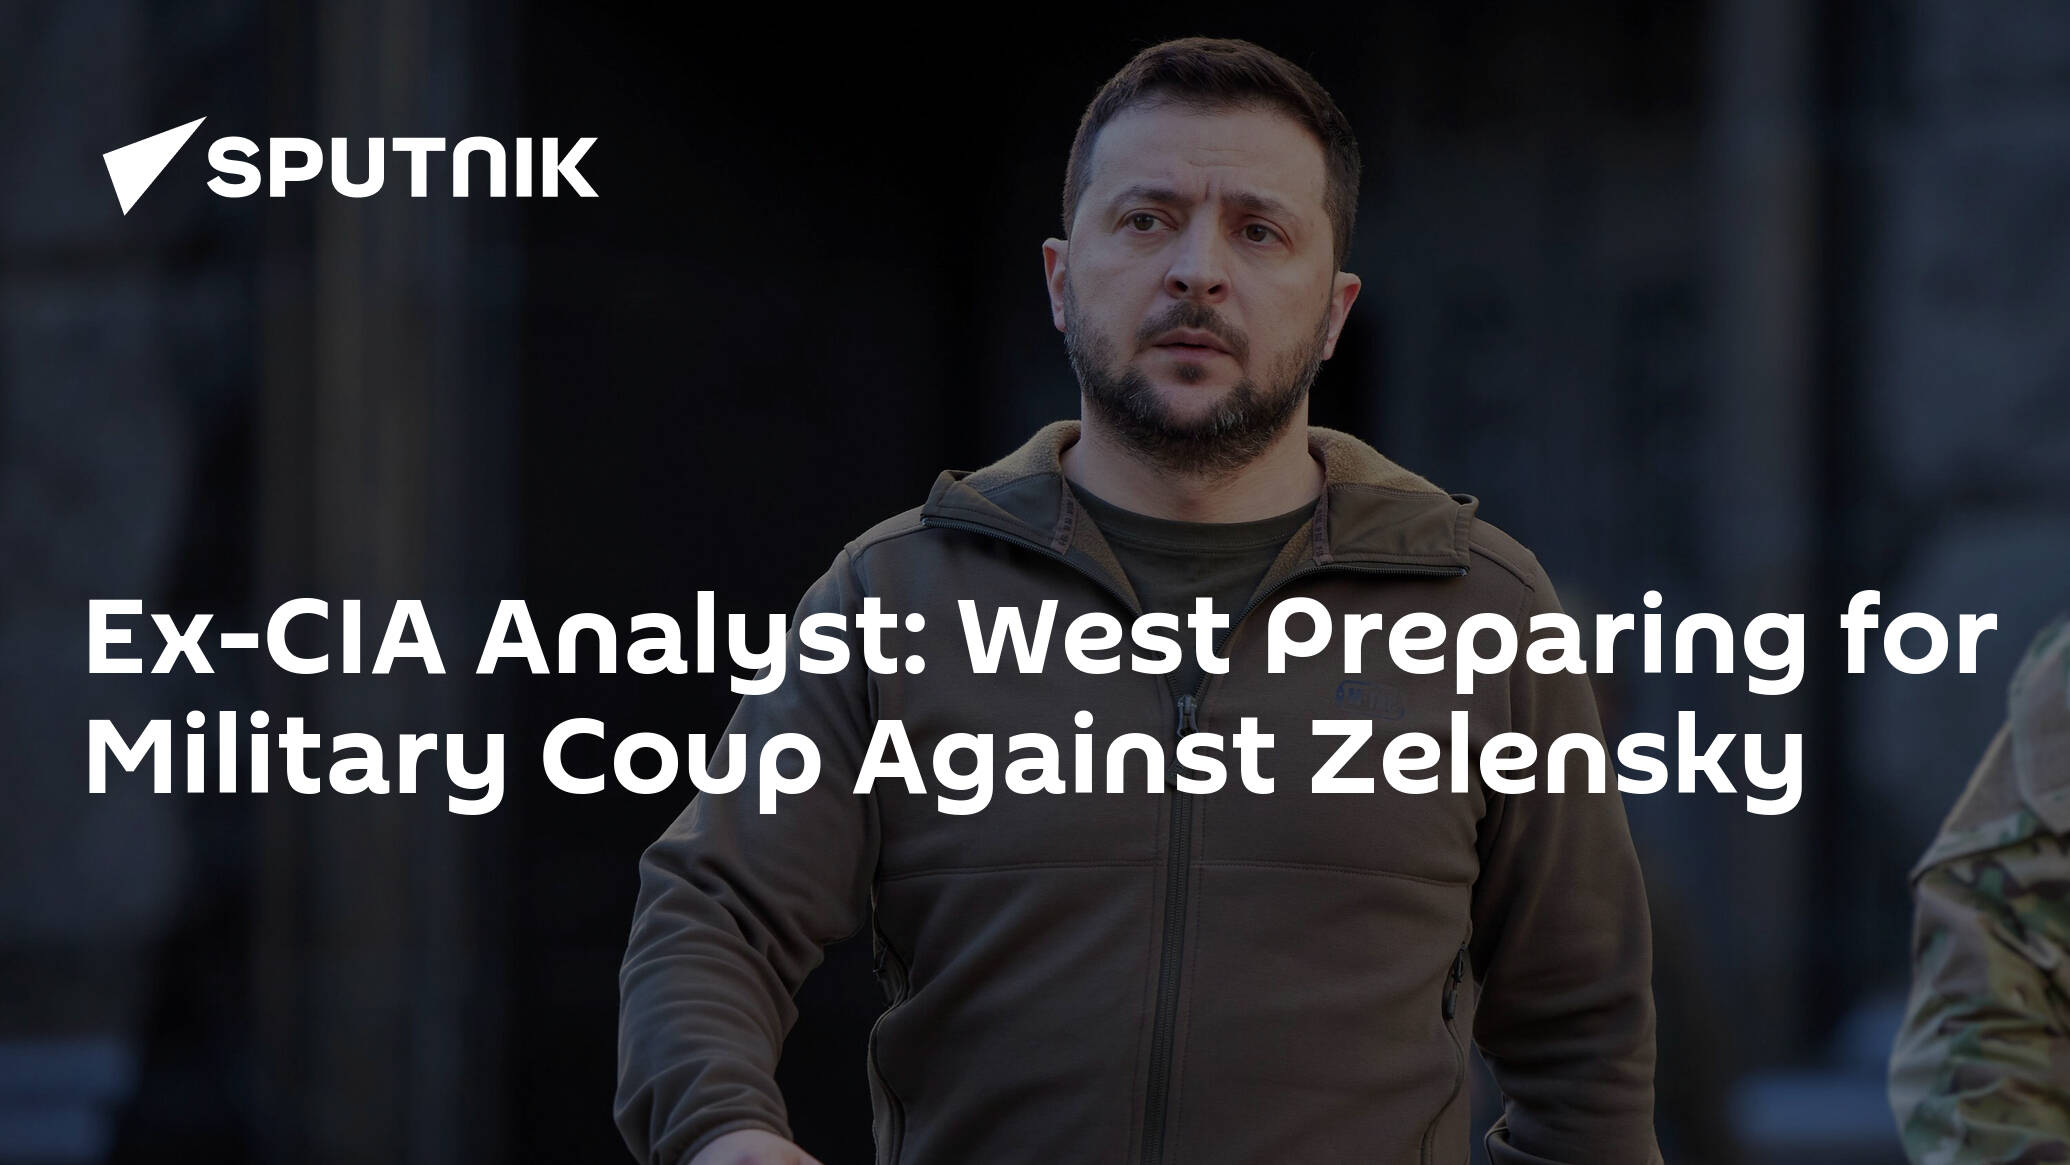 Ex-CIA Analyst: West Preparing for Military Coup Against Zelensky